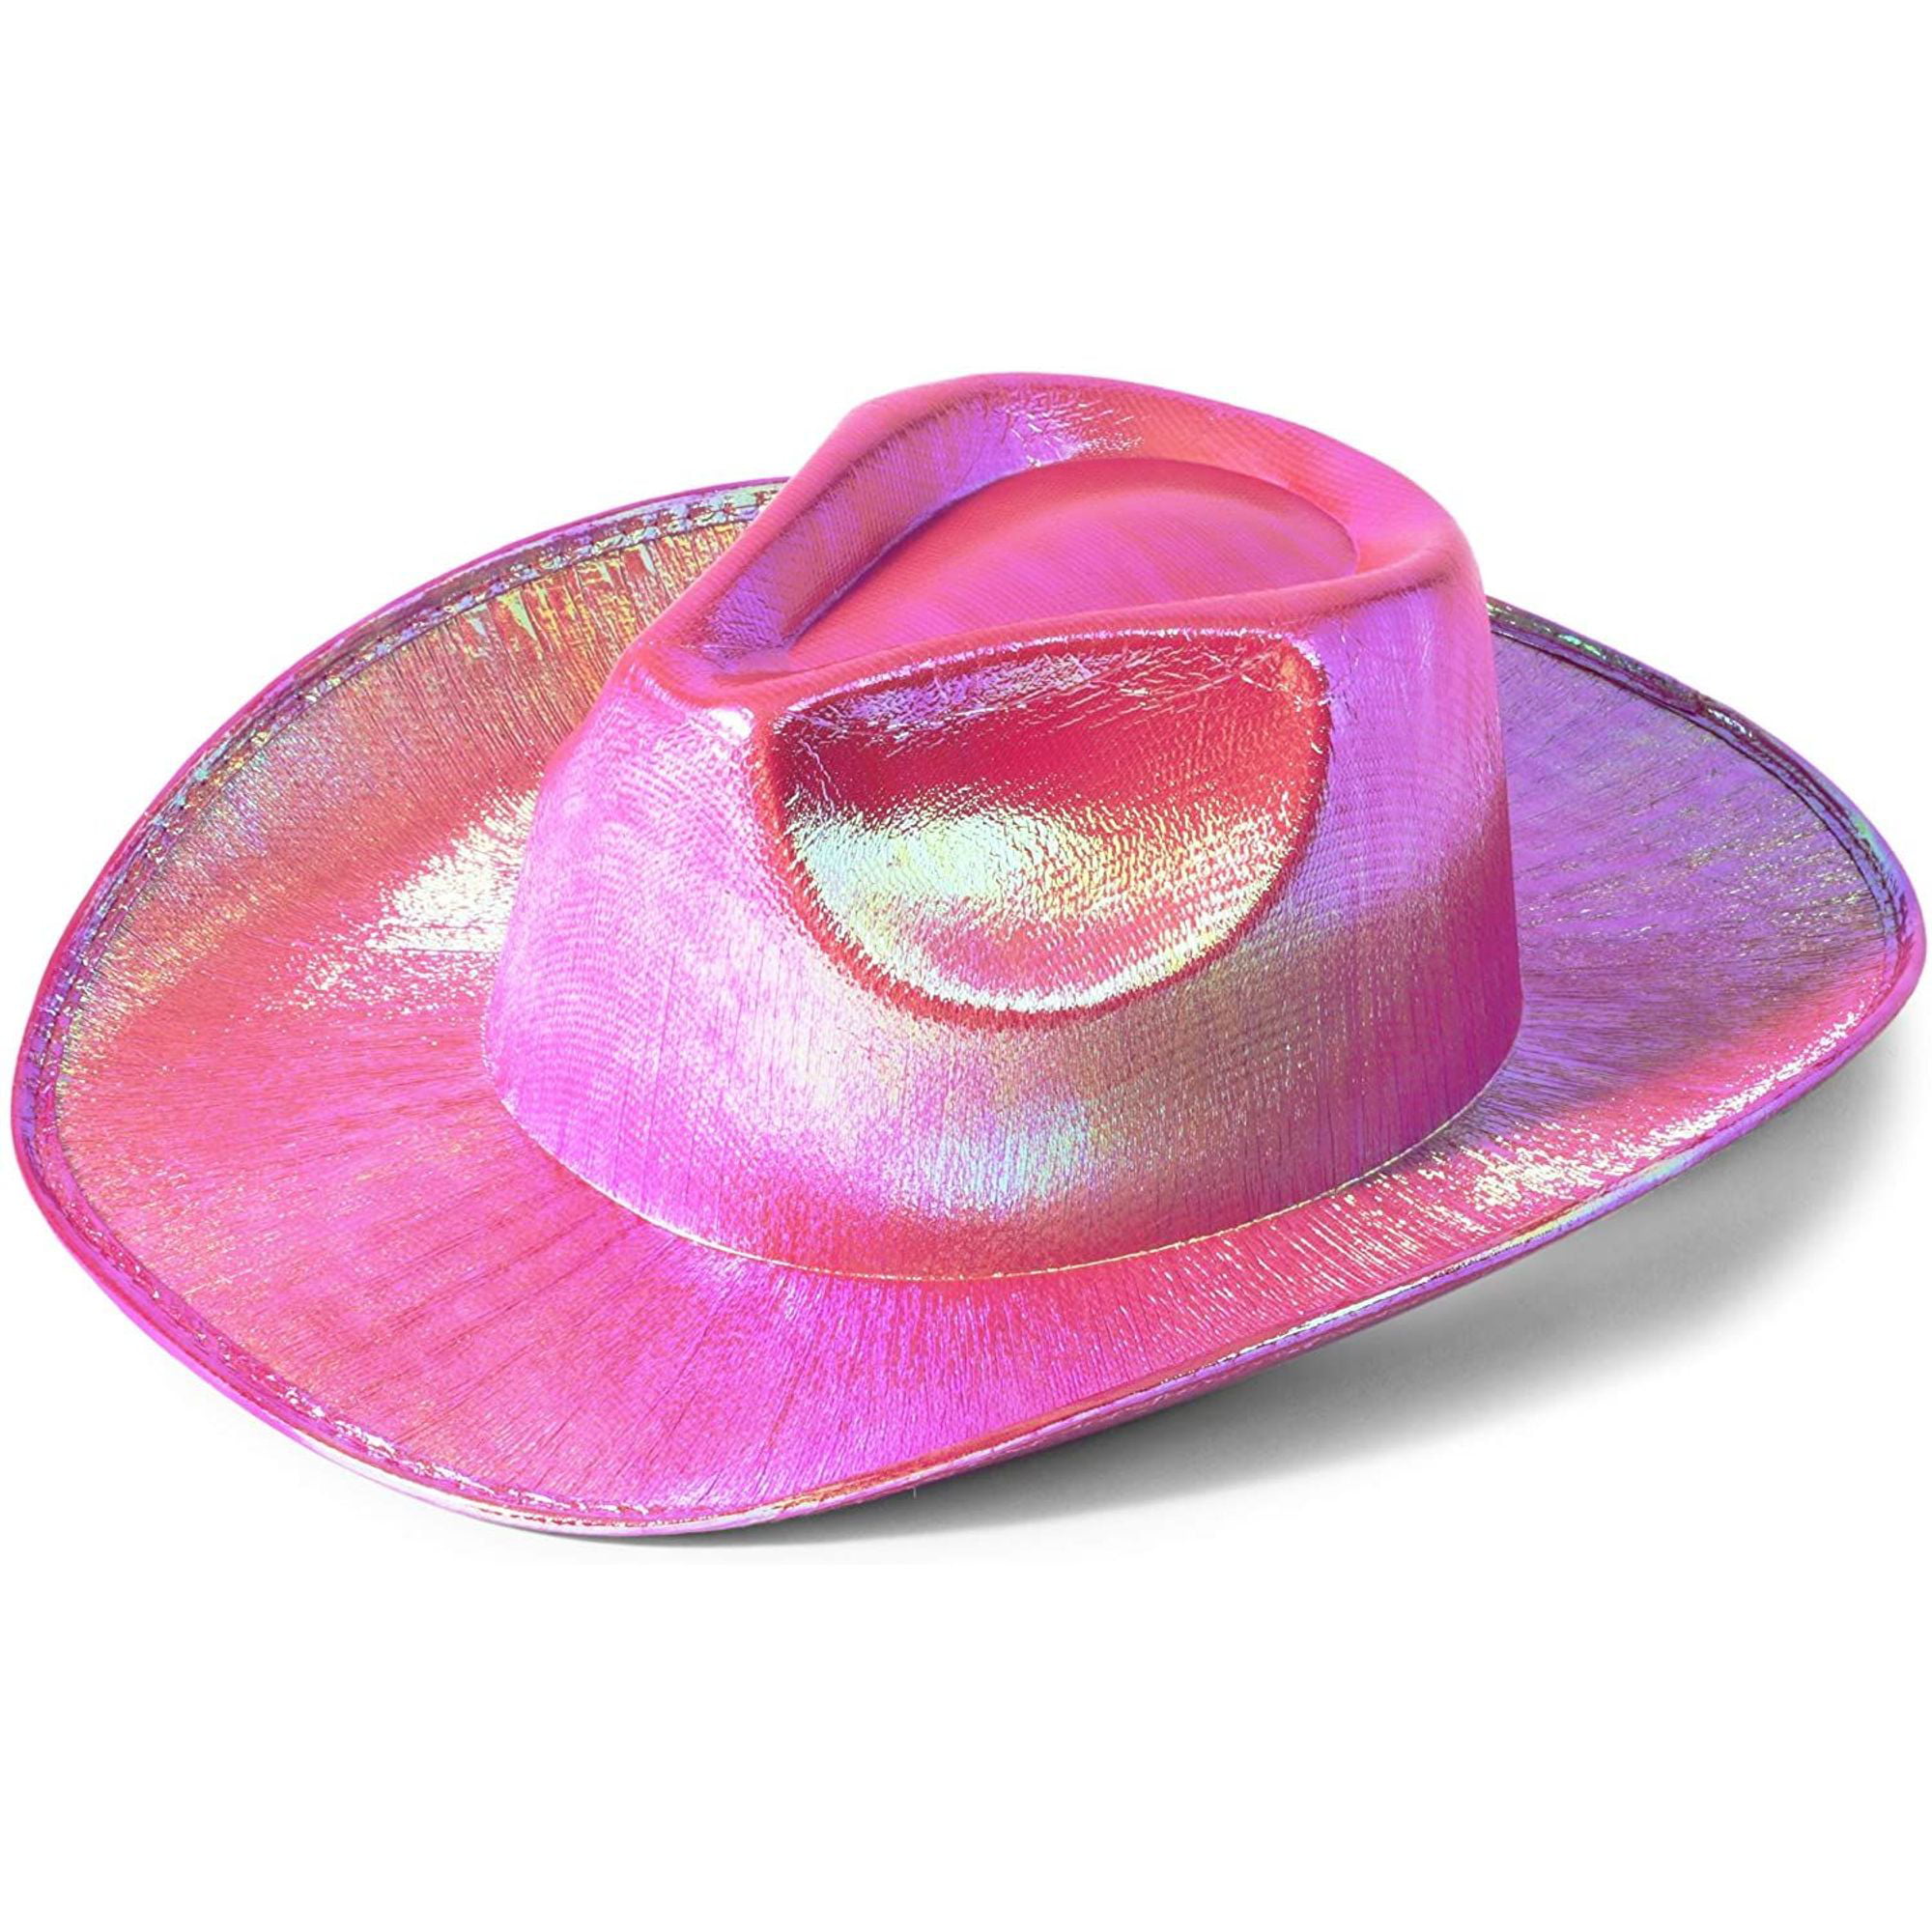 Iridescent Holographic Rave Bachelorette Party Metallic Space Cowgirl Cowboy Hat